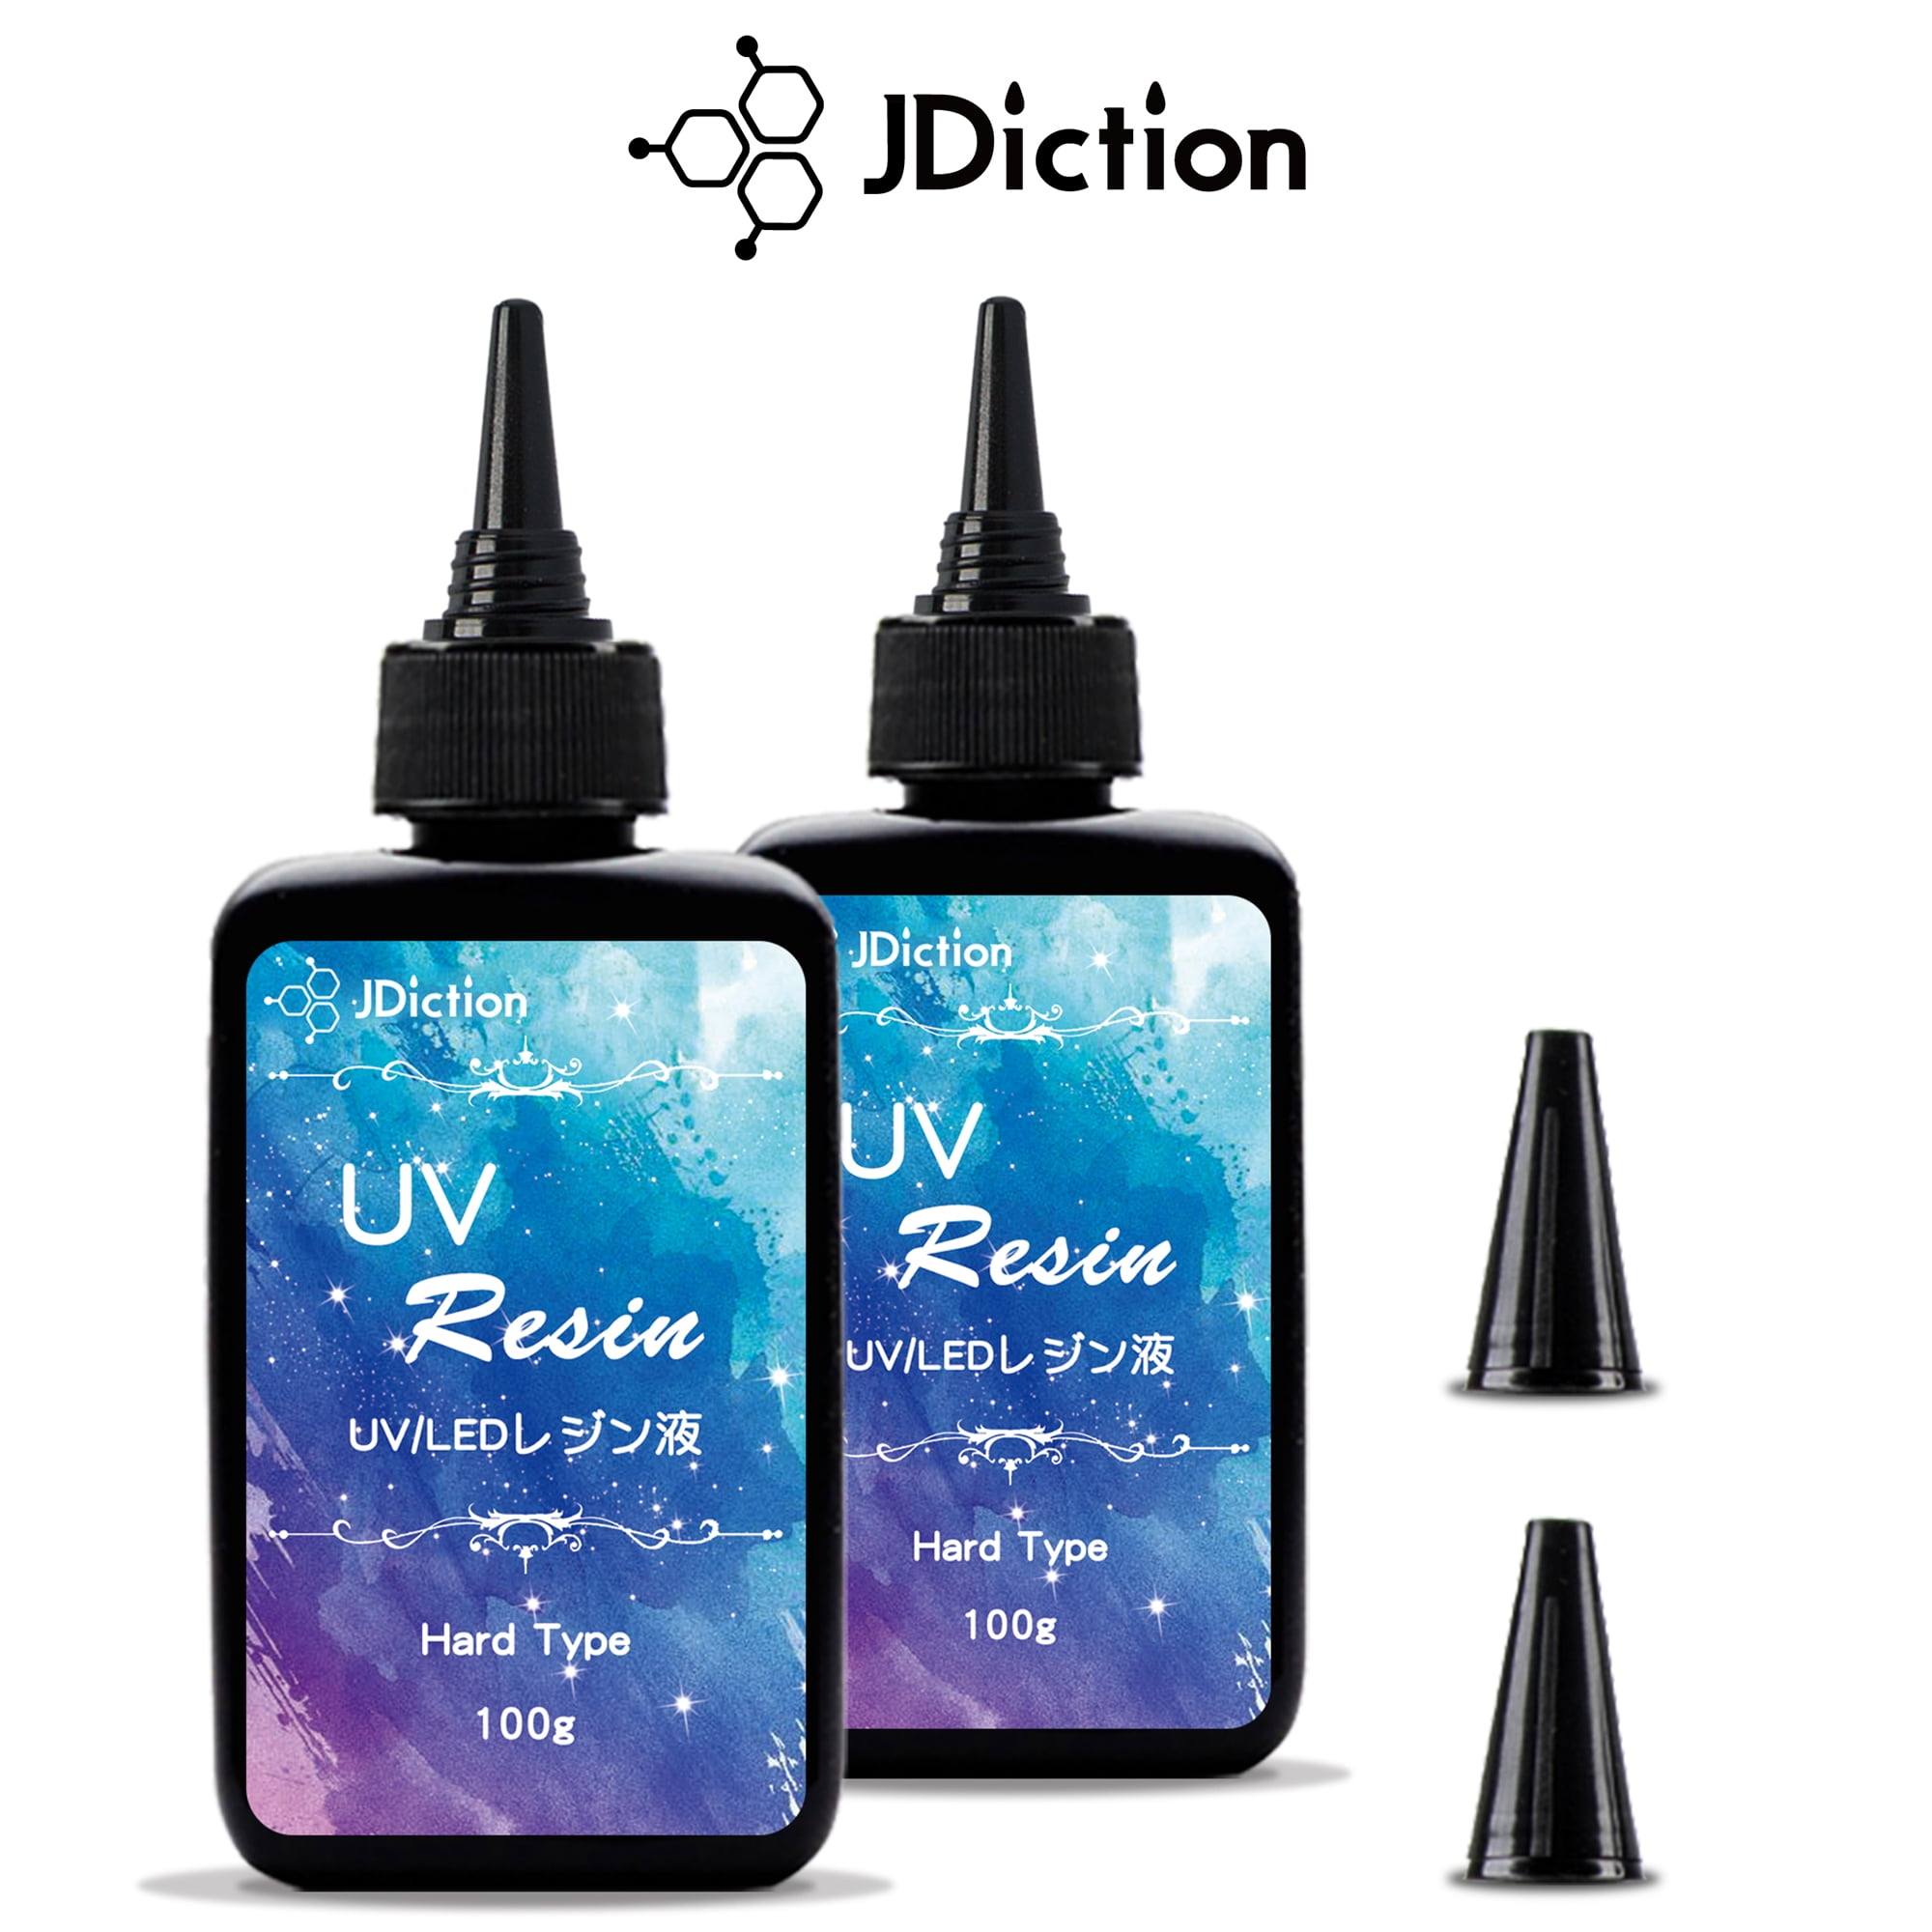 JDiction New UV Resin Kit with Light, Crystal Clear Hard Resin Sunlight Curing UV Resin Beginner Kit for Jewelry, Doming, Coating, and Casting, DIY